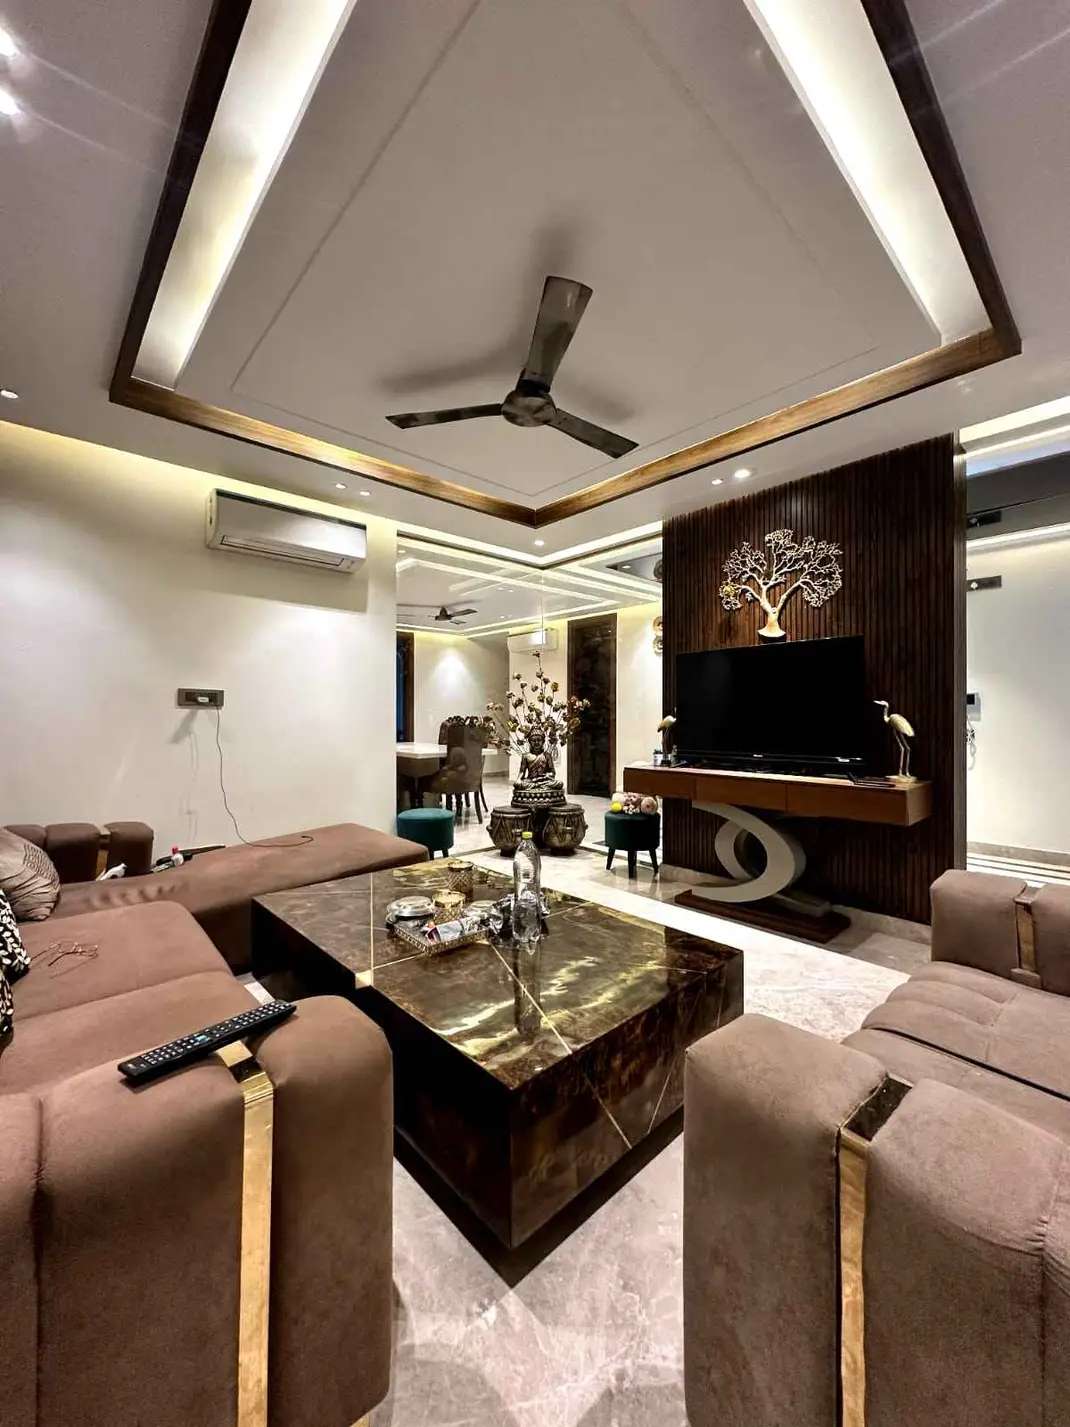 4 Bed/ 4 Bath Sell House/ Bungalow/ Villa; 3,618 sq. ft. lot for sale @Dlf phase 2 gurugram 